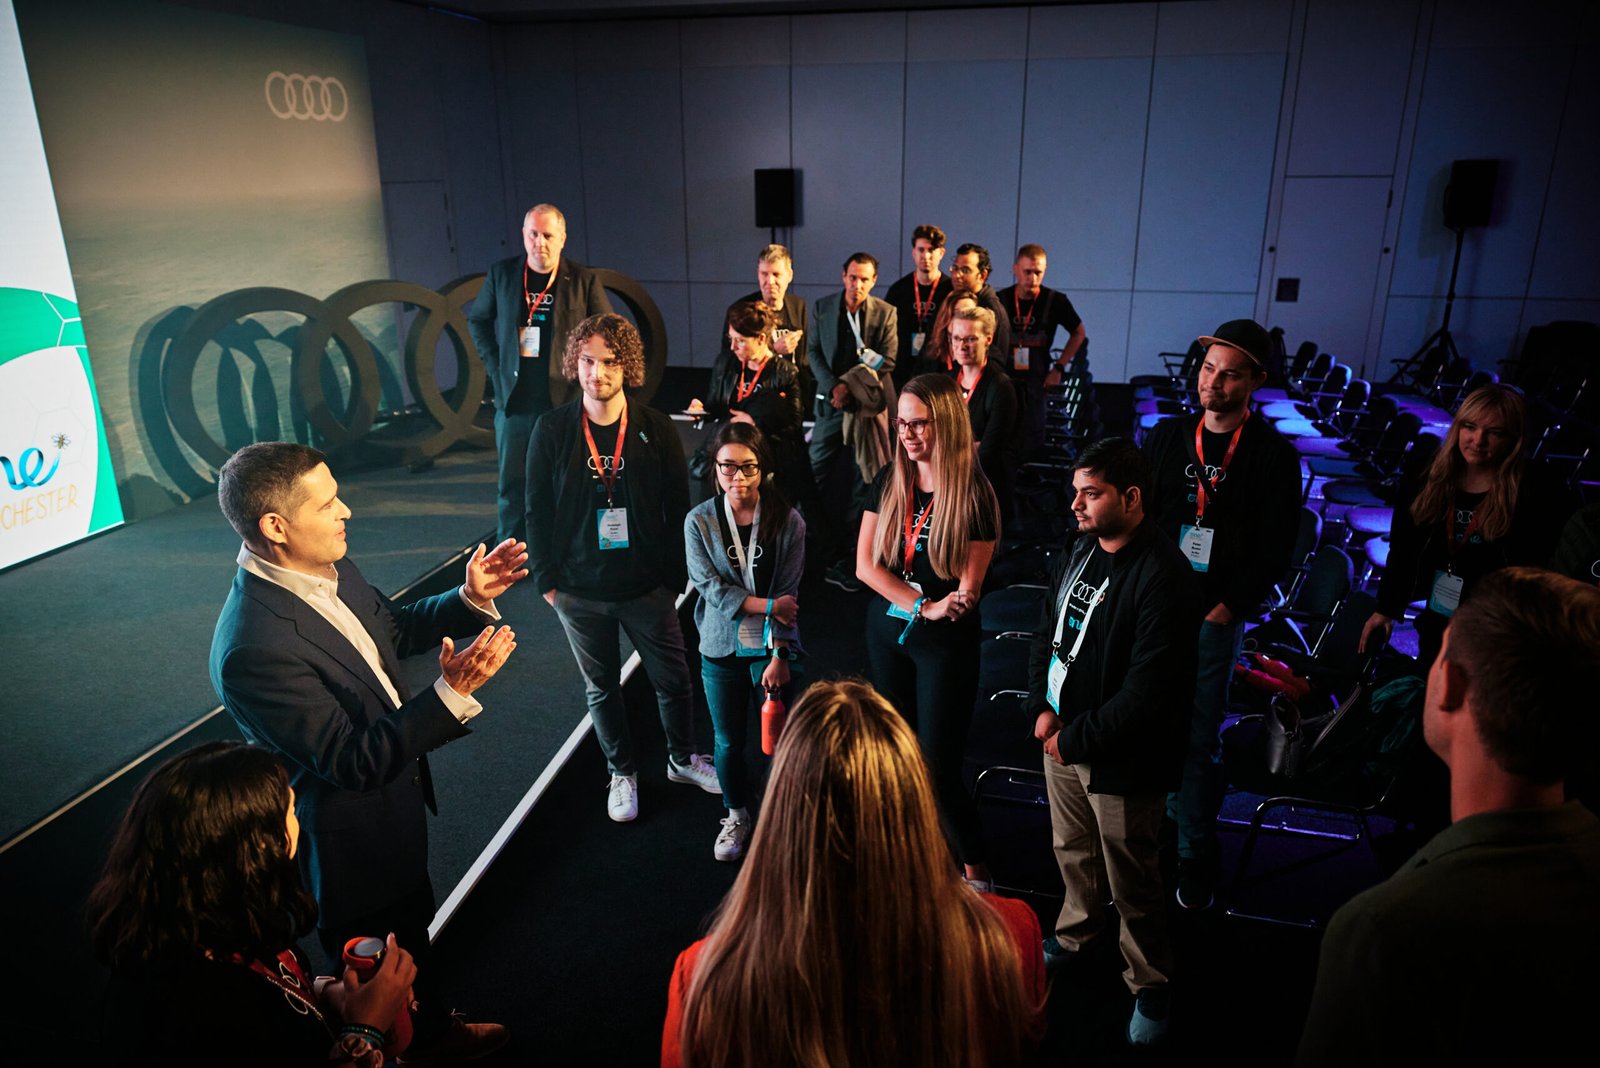 Visions of the future in Manchester: Audi brings young talents to the One Young World Summit